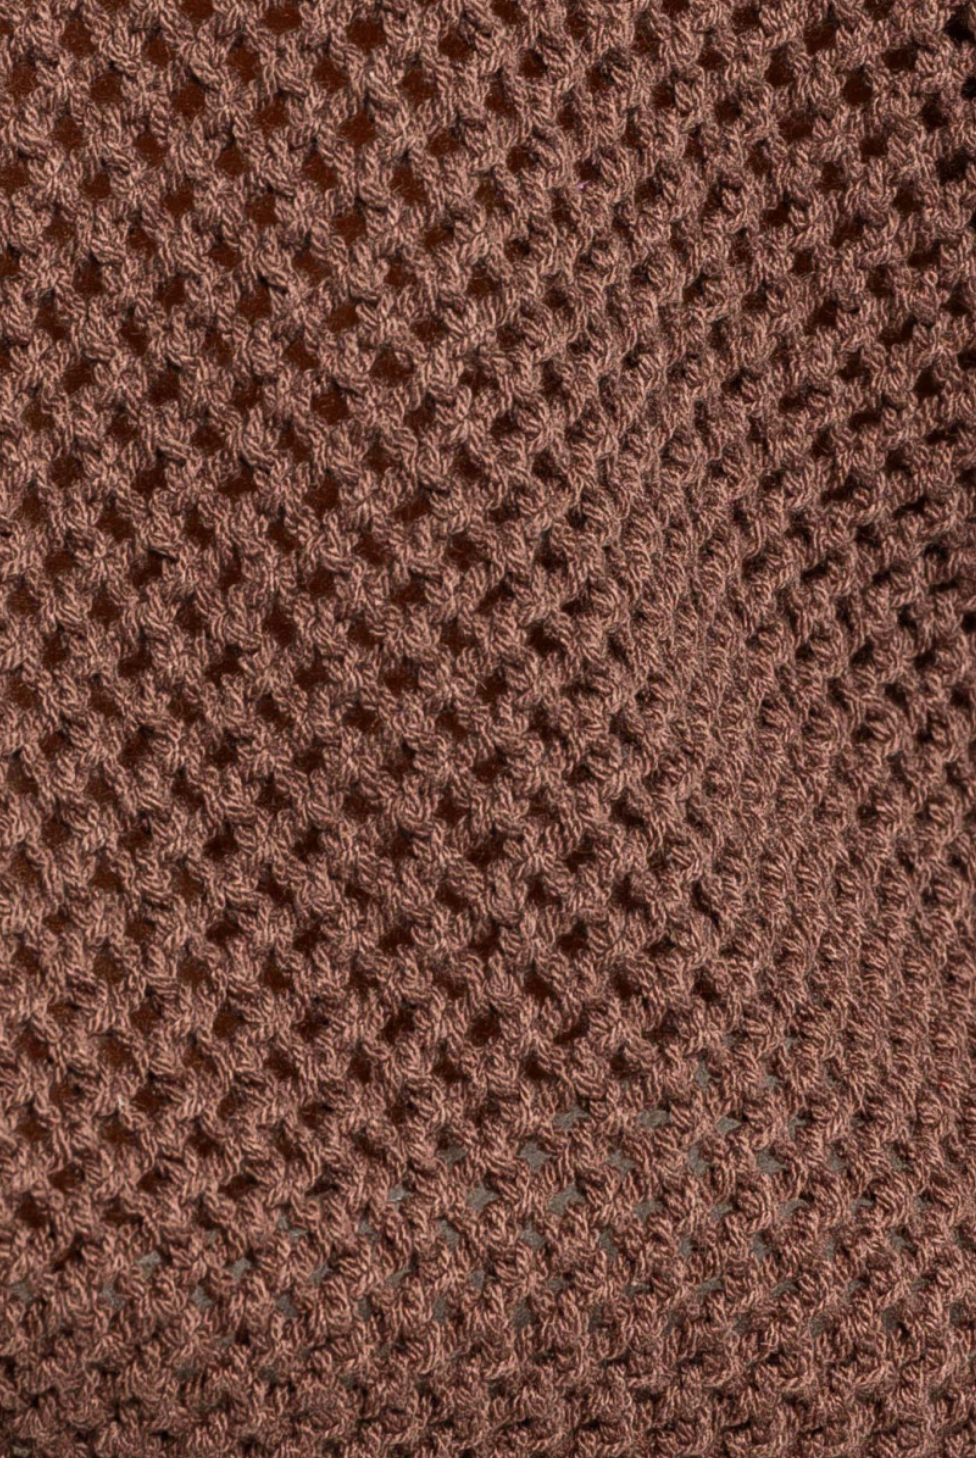 Brown Open Knit Sweater Top